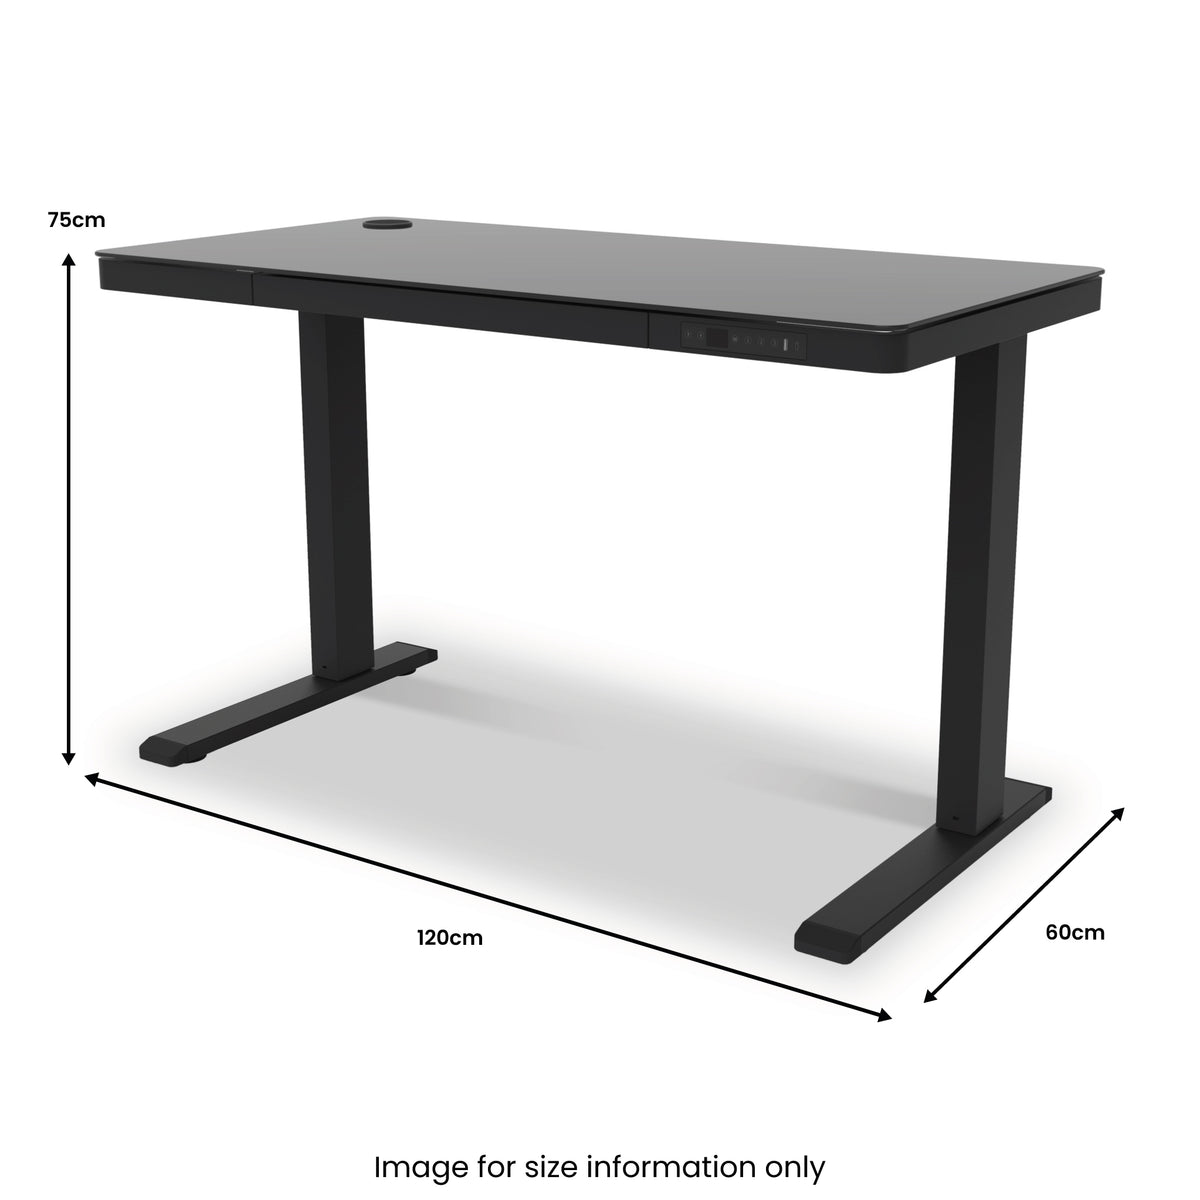 Koble Juno 4.0 Adjustable Smart Desk with Wireless Charging dimensions